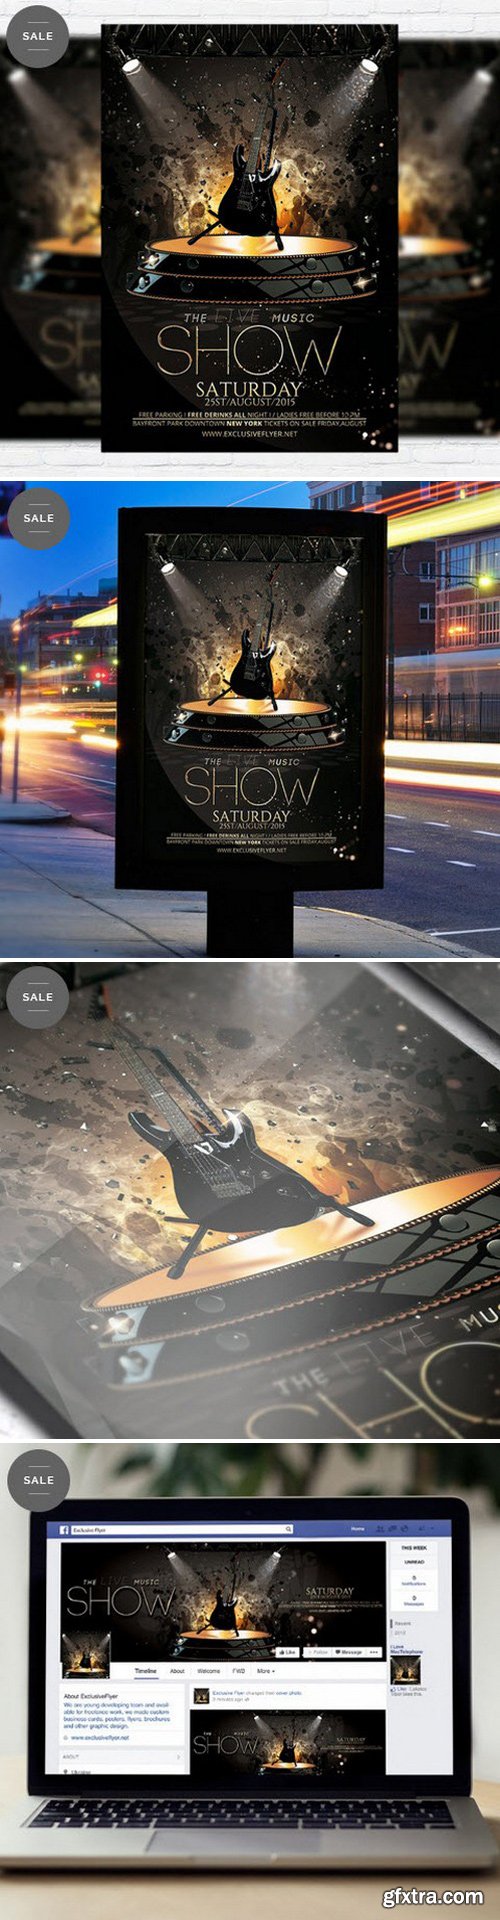 The Live Music Show – Flyer Template + Facebook Cover